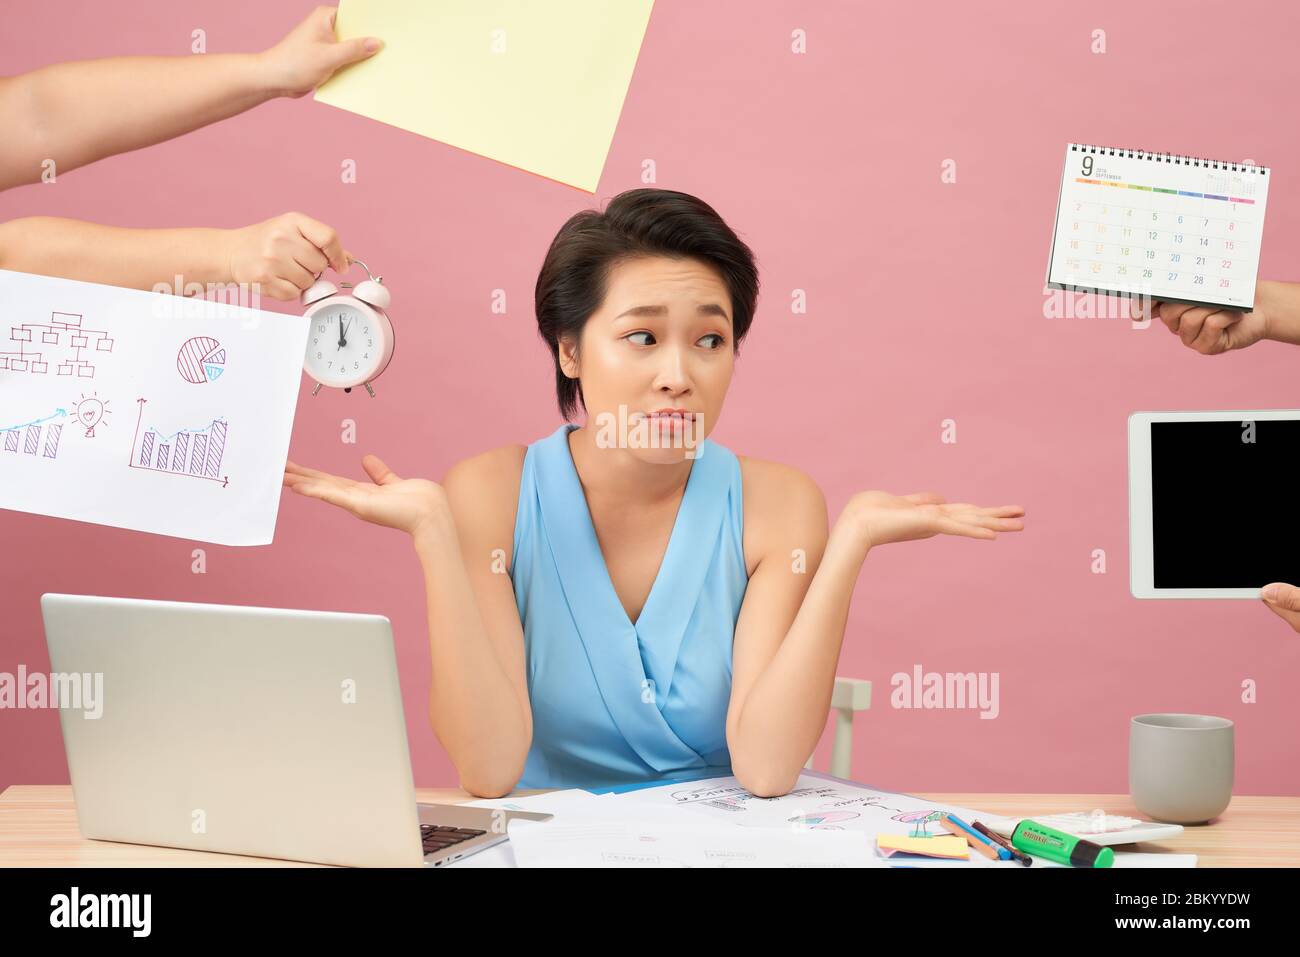 Overworked young employee refuses all things, frowns face in annoyance, sits at desktop with paper documents and notepad, isolated over pink backgroun Stock Photo